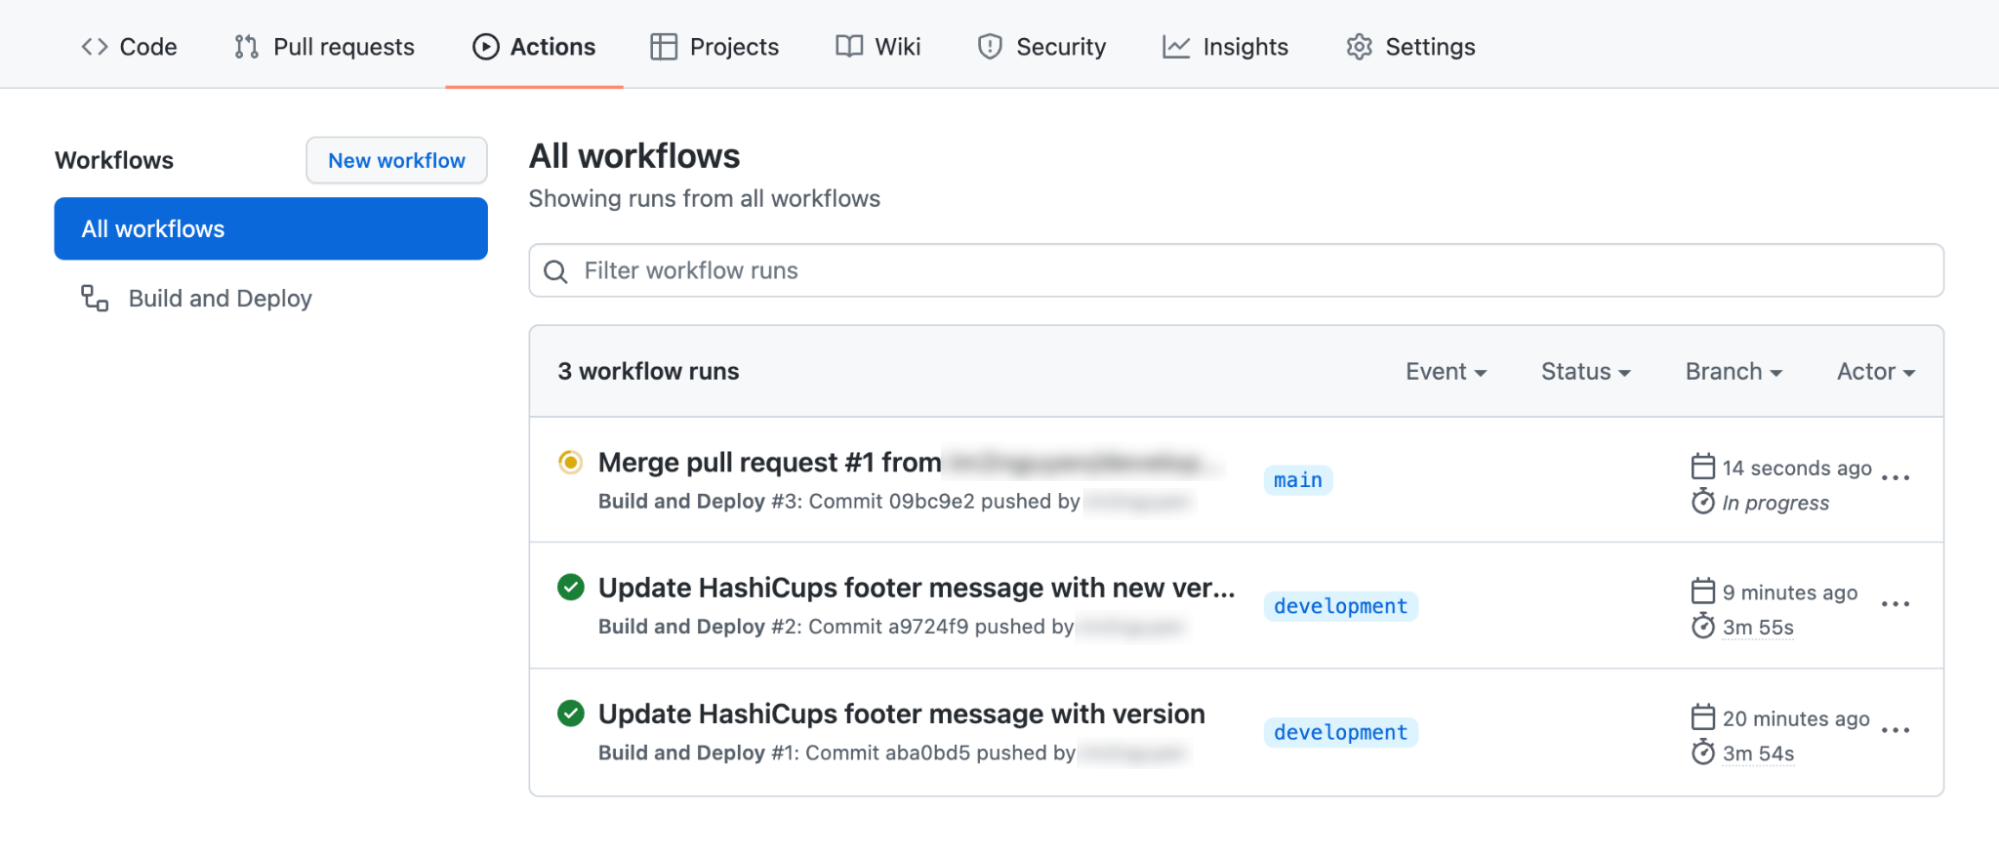 Merging pull request into main triggers a GitHub Actions run